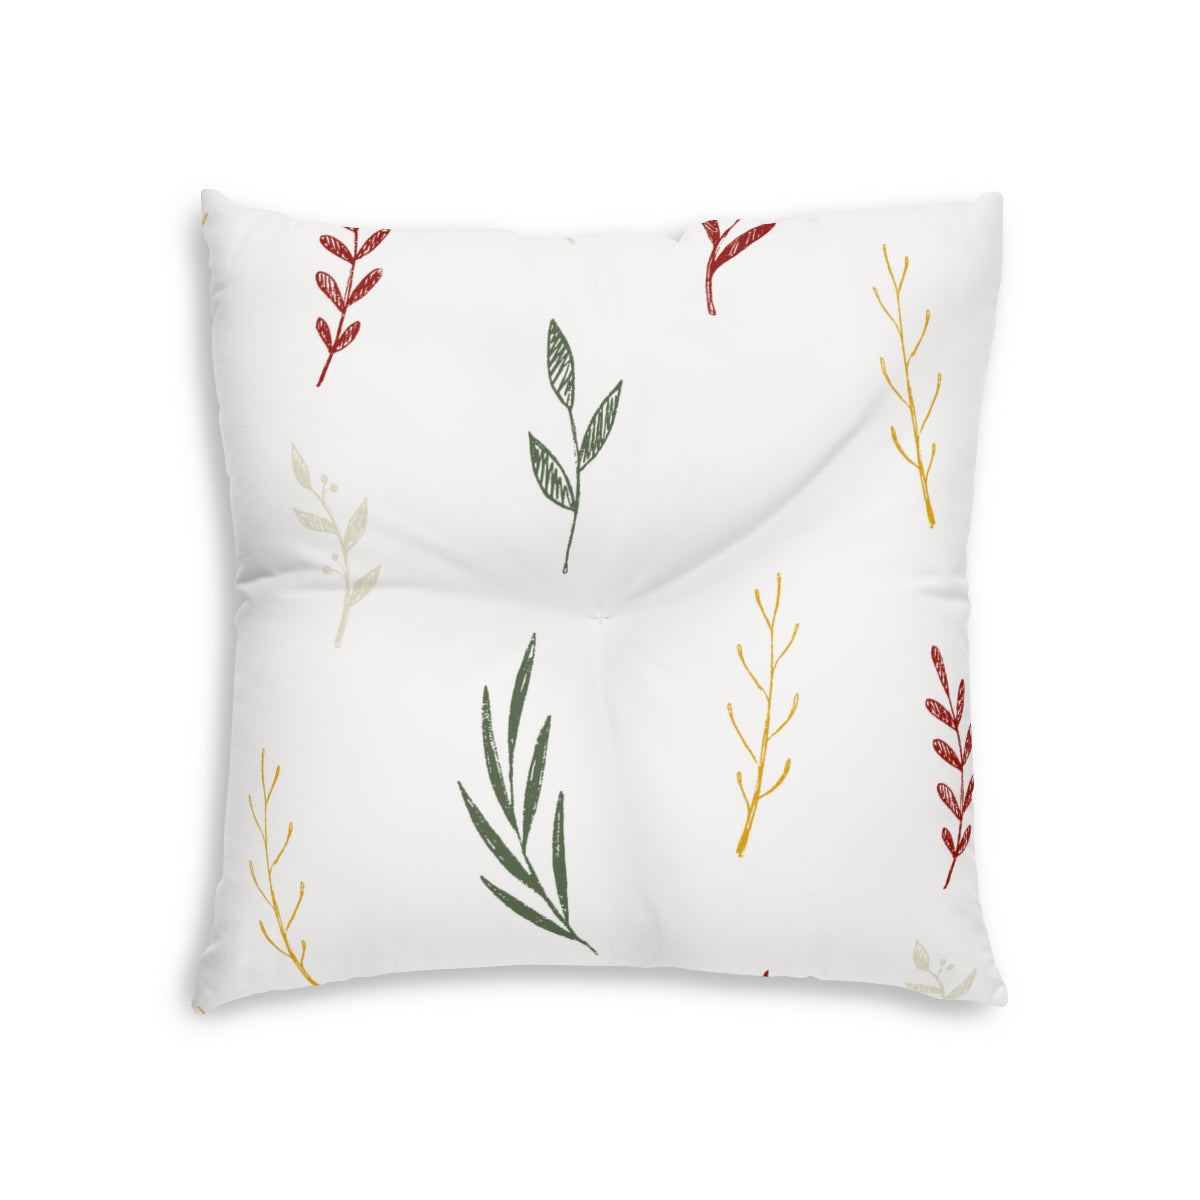 Lifestyle Details - White Square Tufted Holiday Floor Pillow - Colorful Garland - 26x26 - Front View